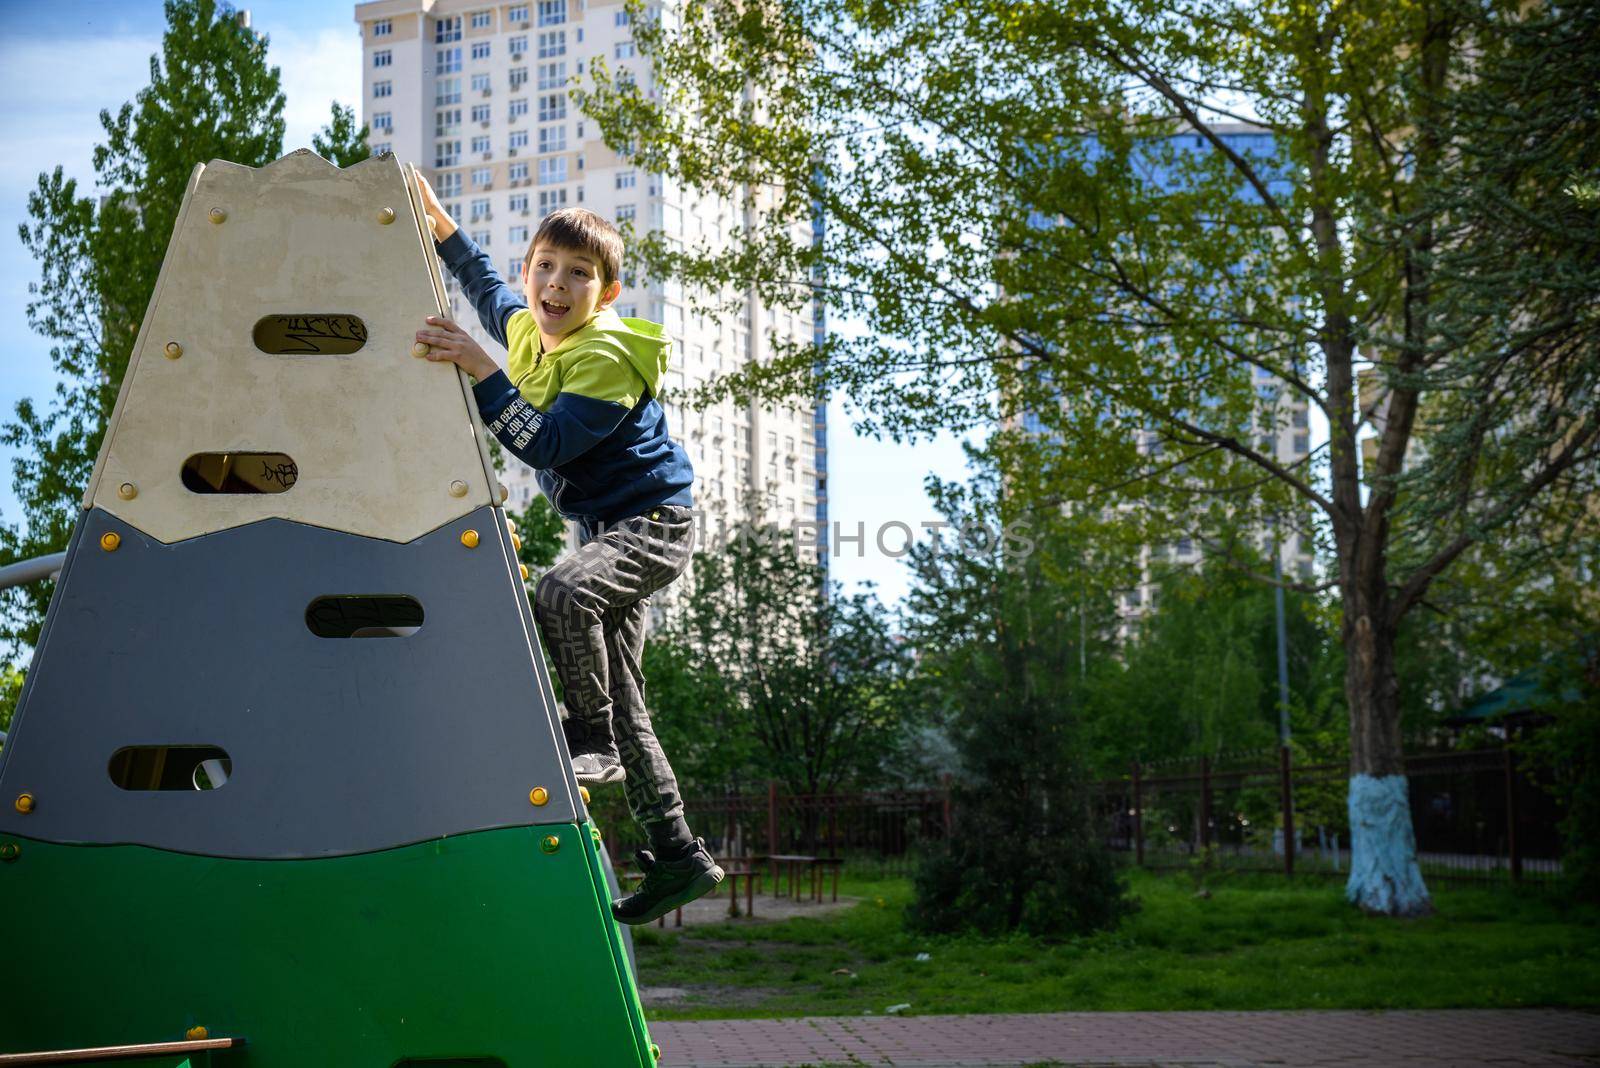 Teenager boy climbing at kid playground outdoor. The climber tra by Kobysh